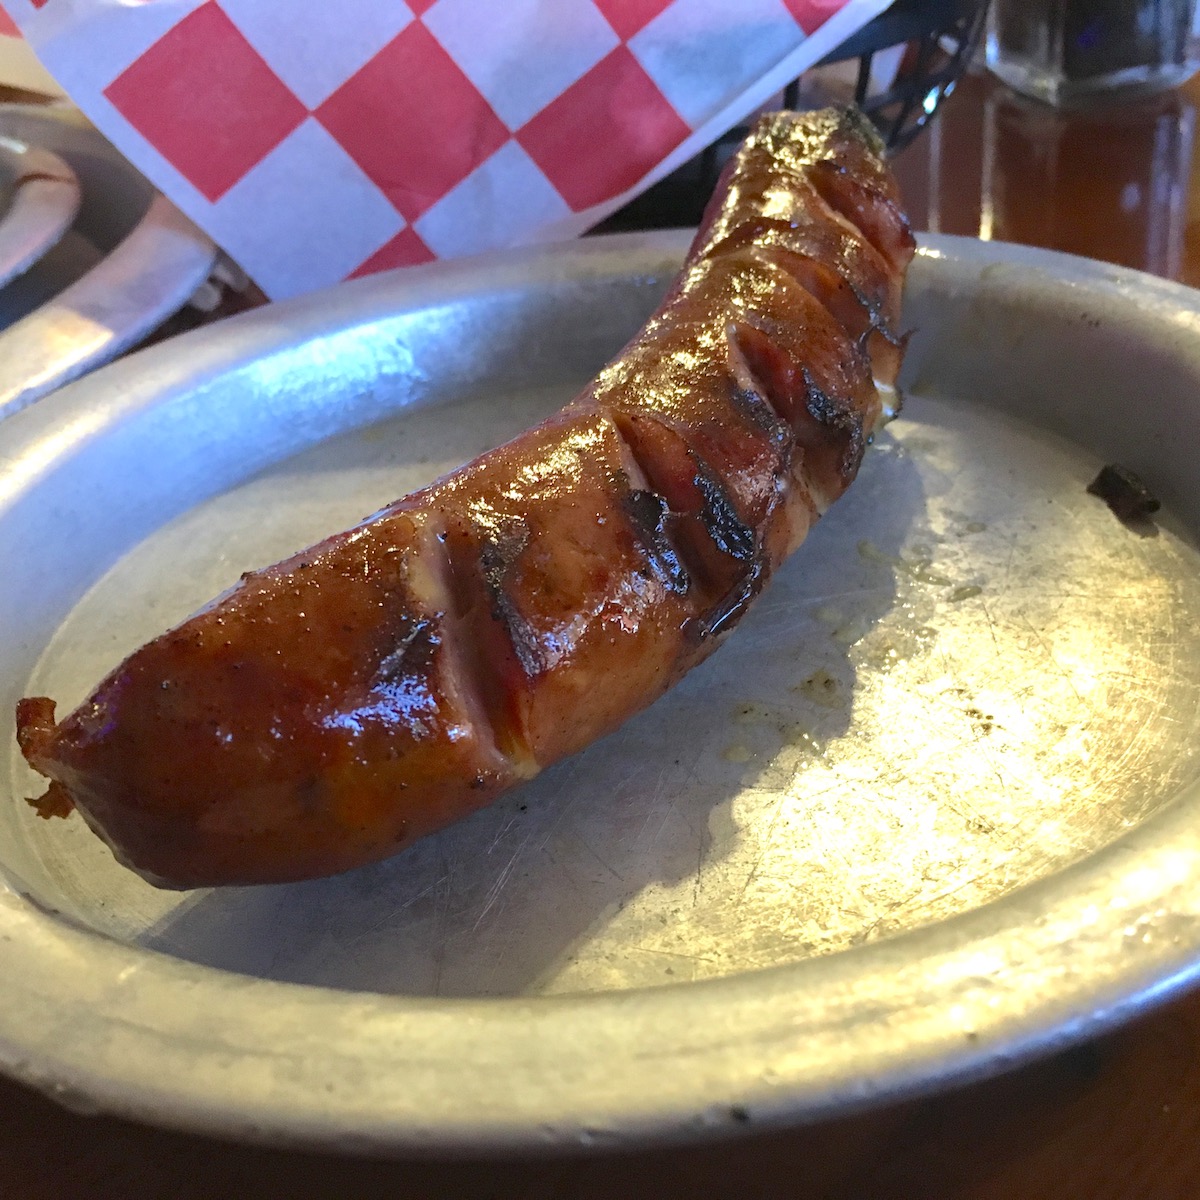 Sausage from Shiver's BBQ in Homestead, Florida